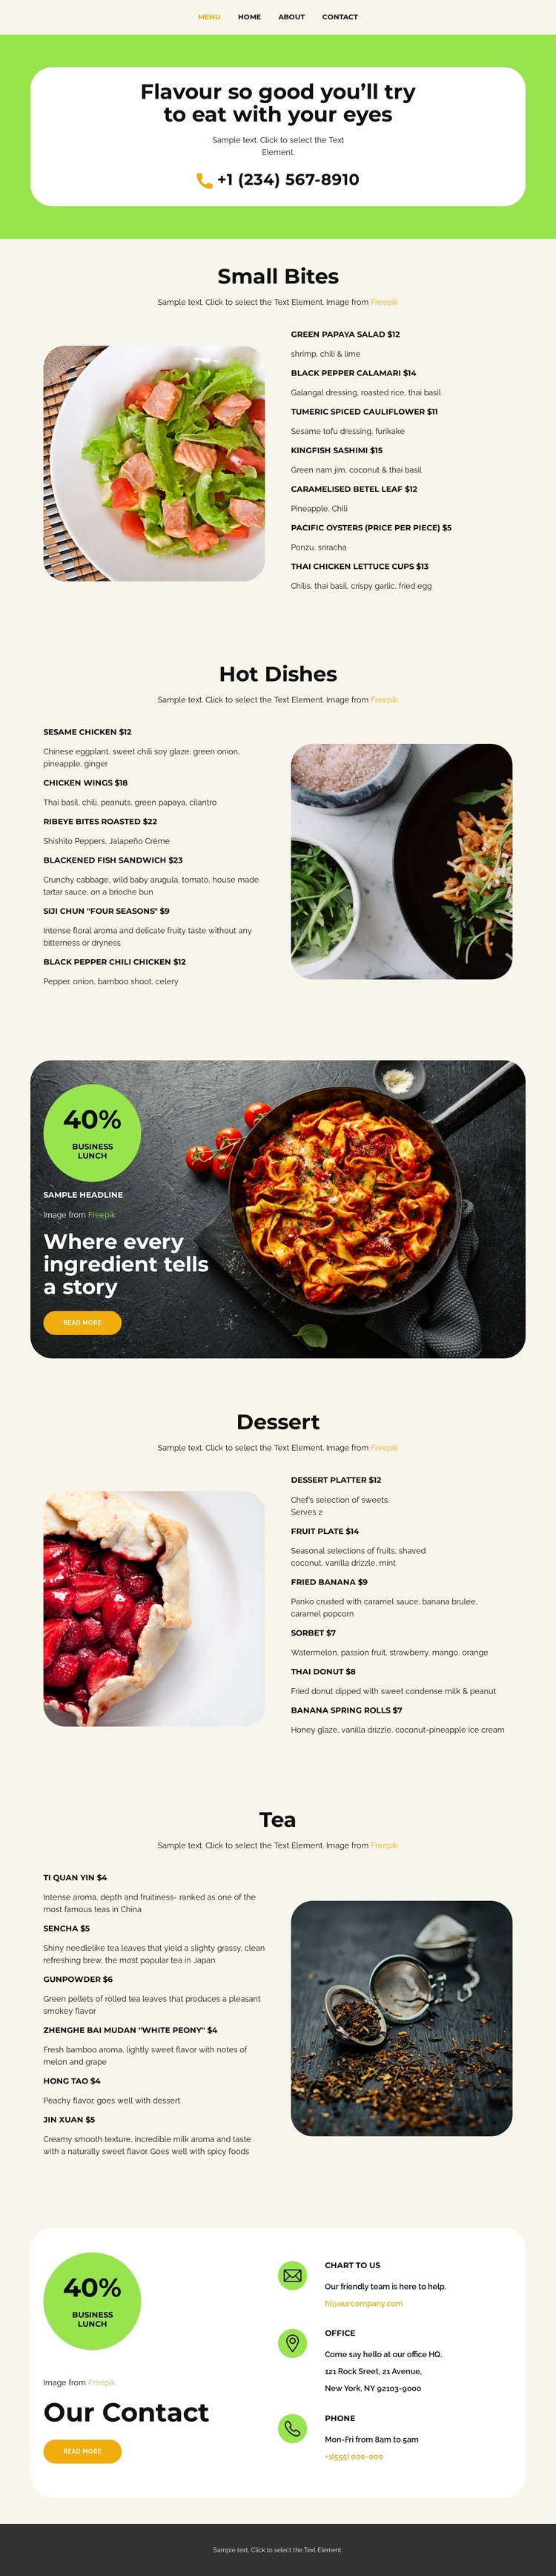 Our Menus HTML5 Template